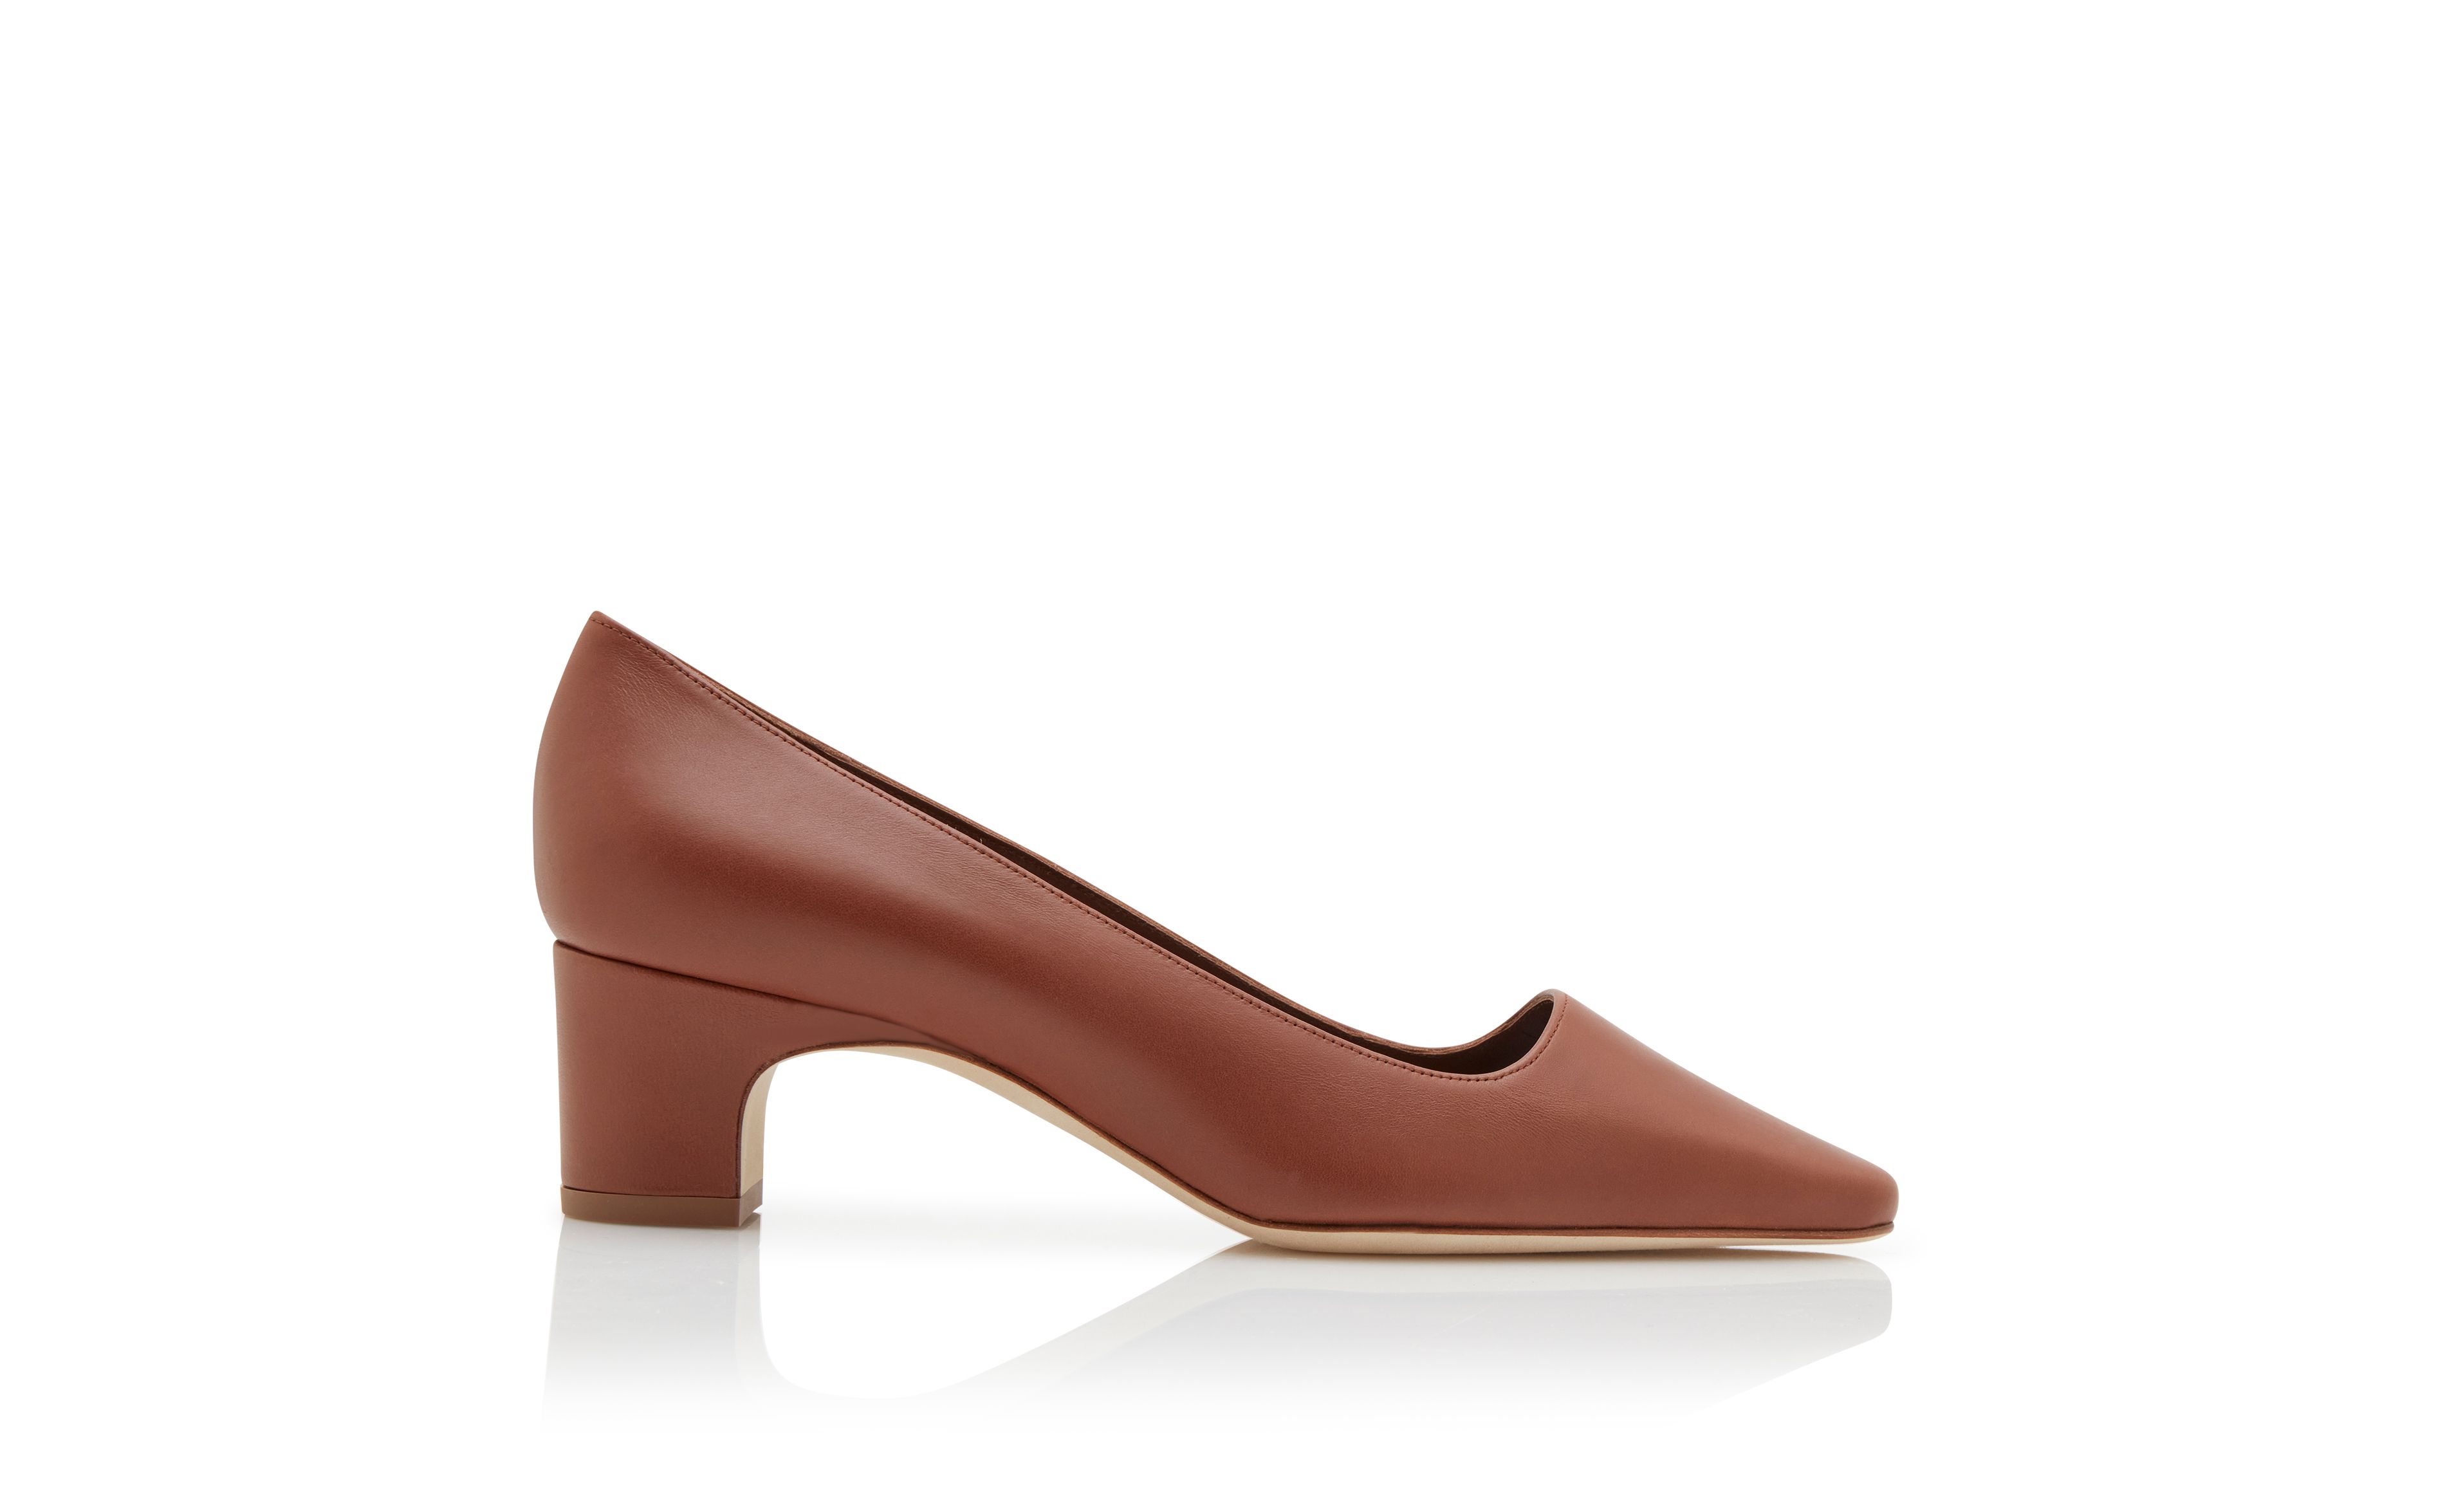 Designer Brown Nappa Leather Pumps - Image Side View